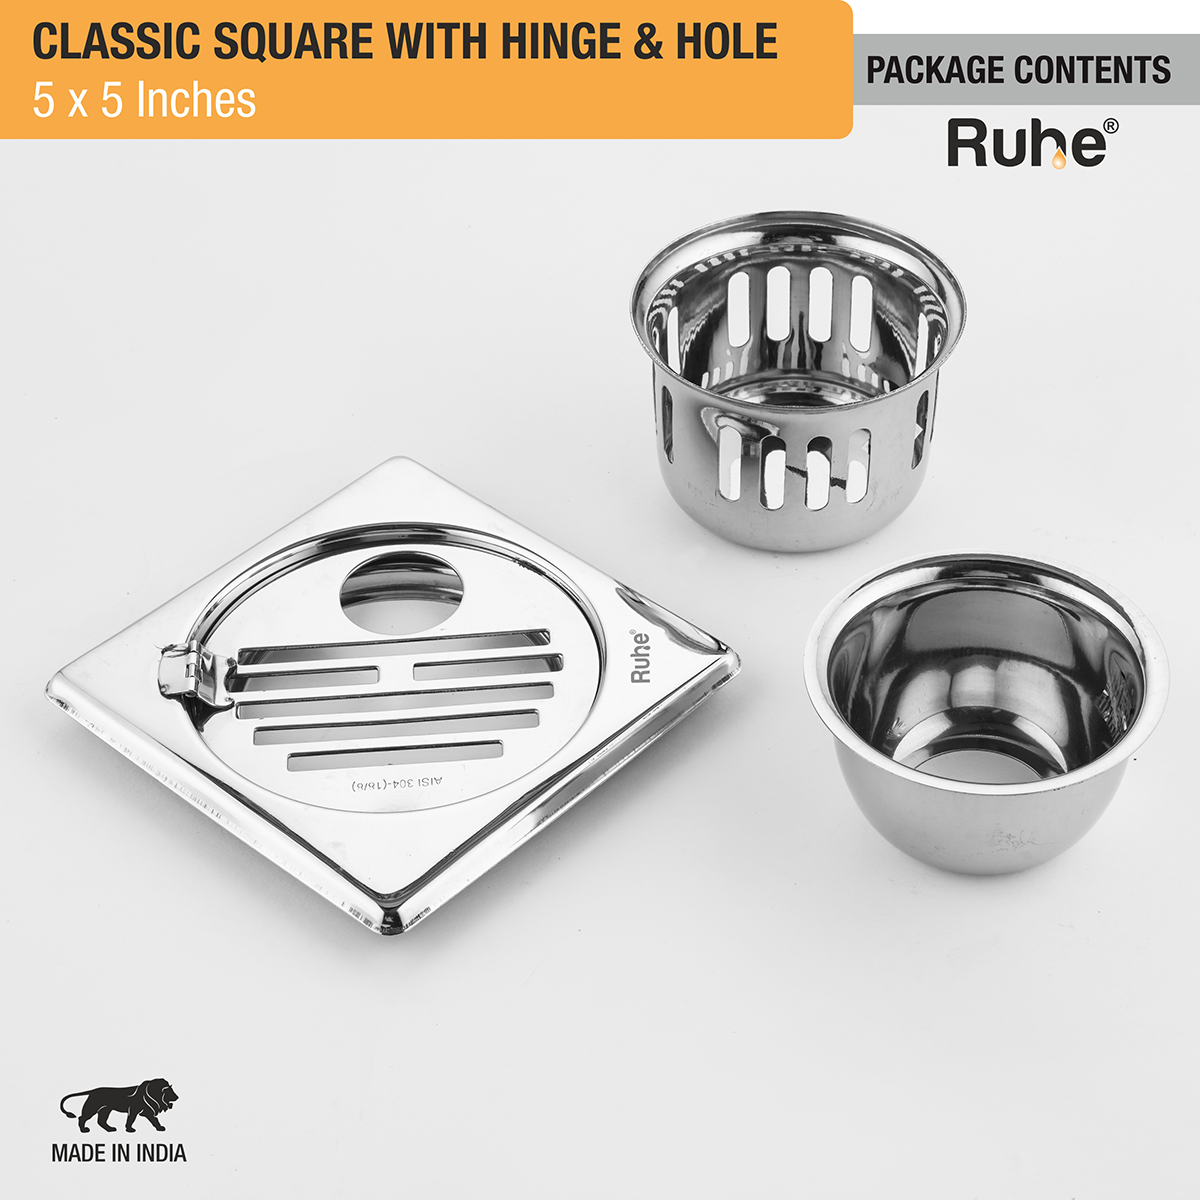 Classic Square Floor Drain (5 x 5 Inches) with Hinge, Hole & Cockroach Trap (304 Grade) package content